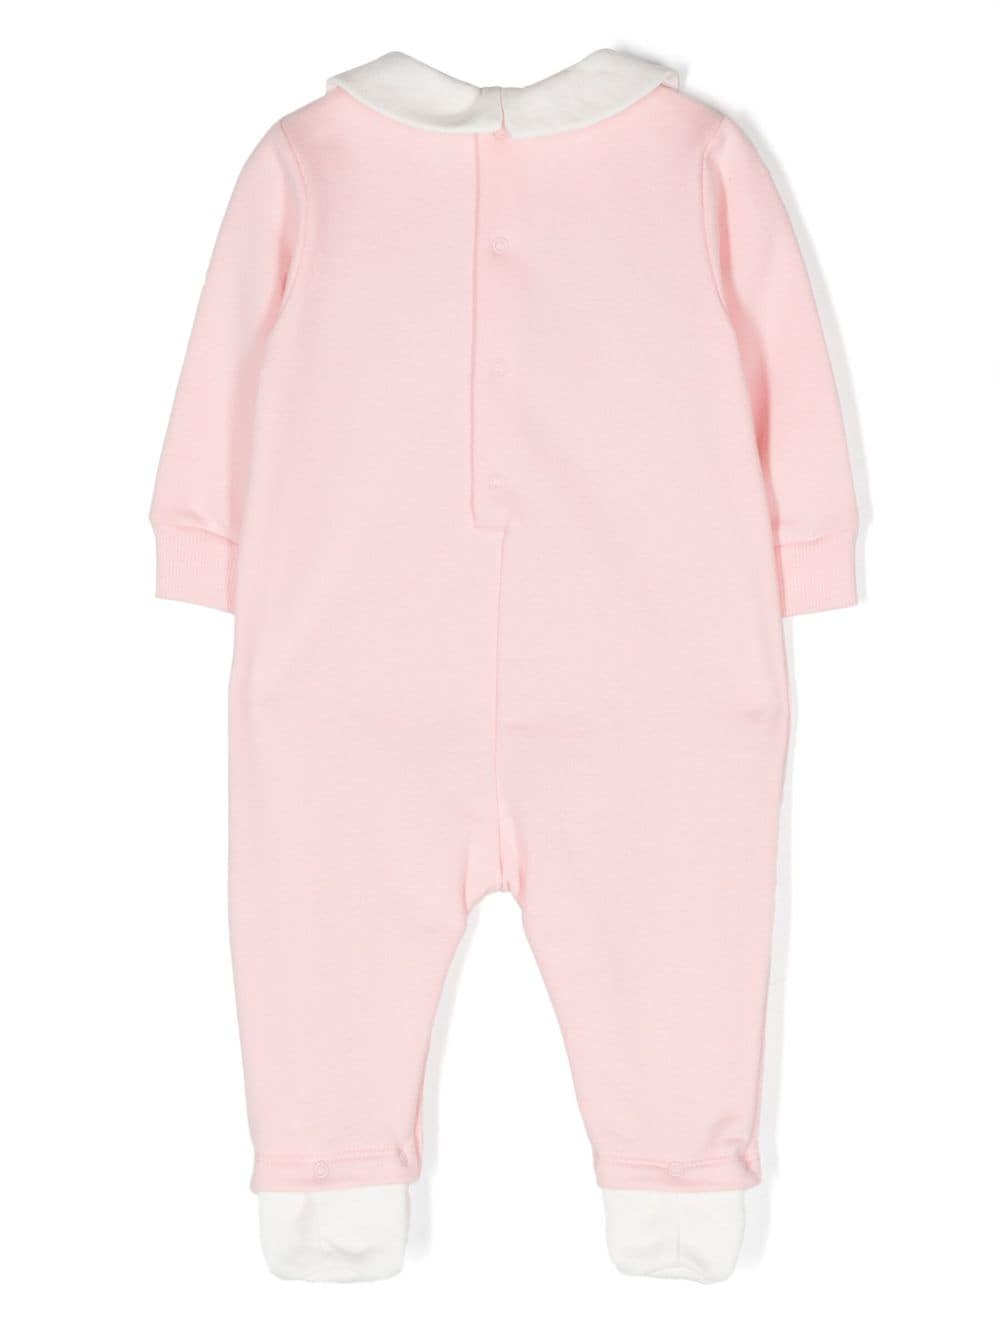 Pink onesie set for baby girls with logo